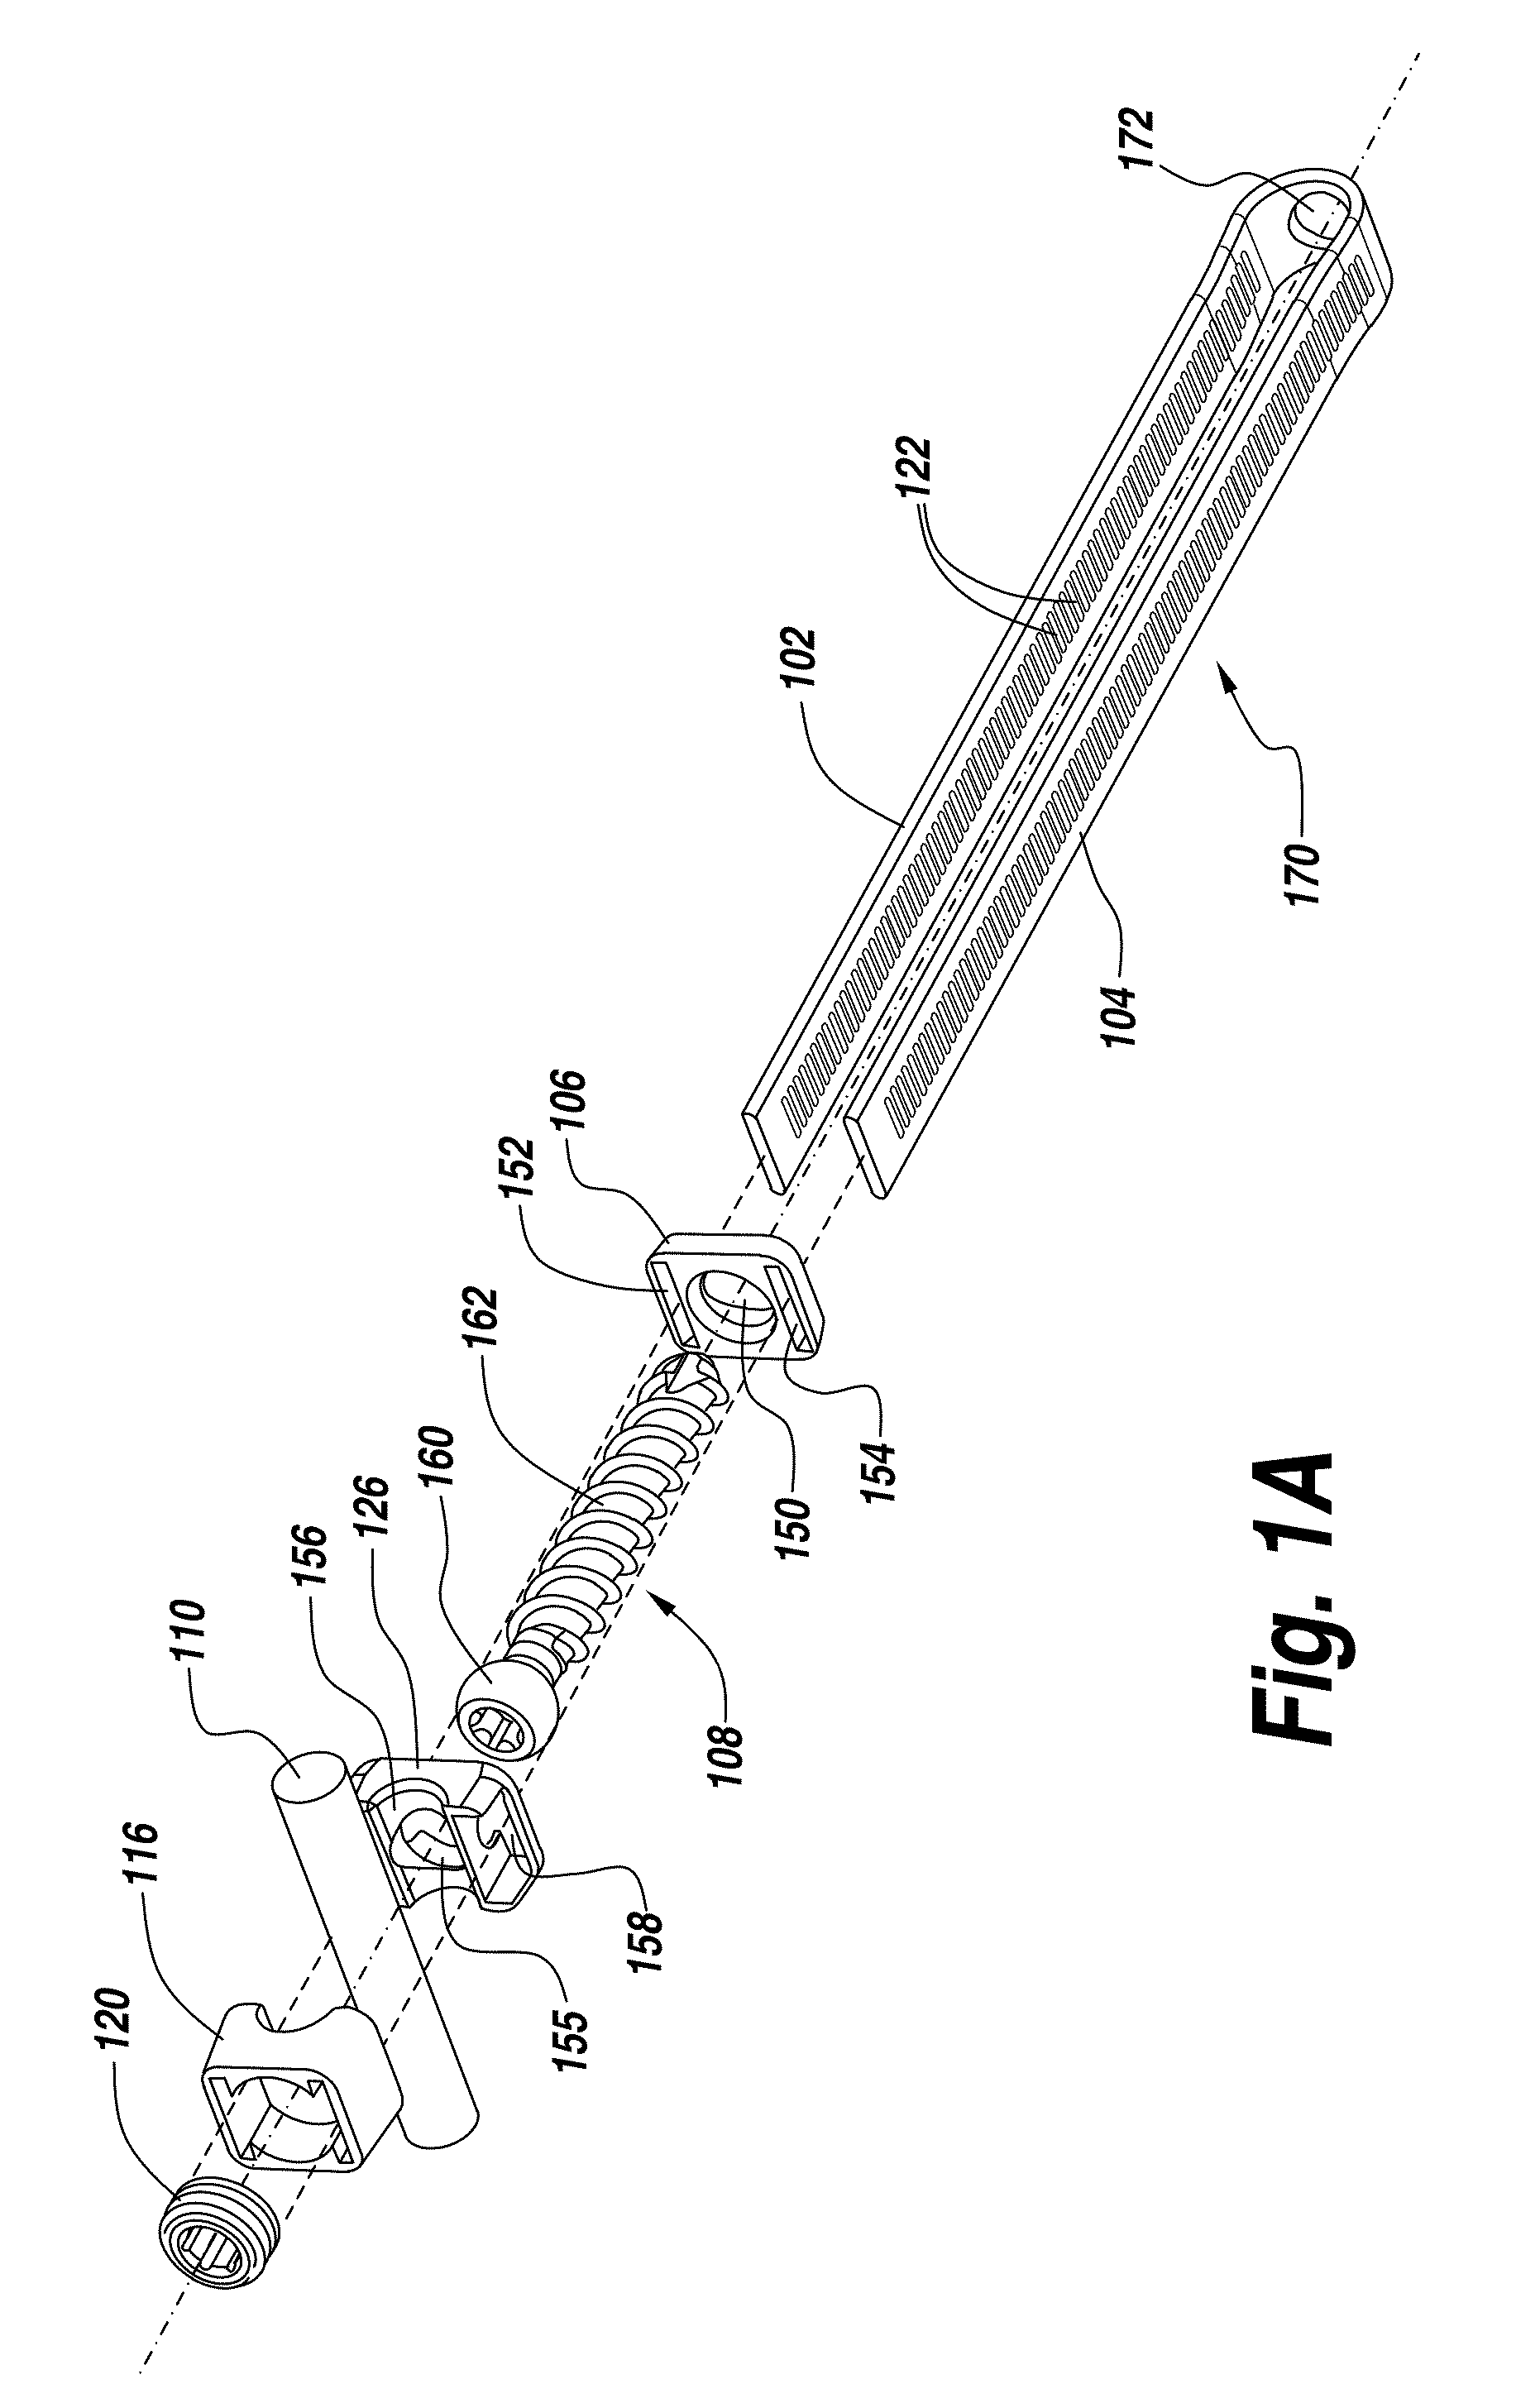 Spinal implant with a flexible extension element